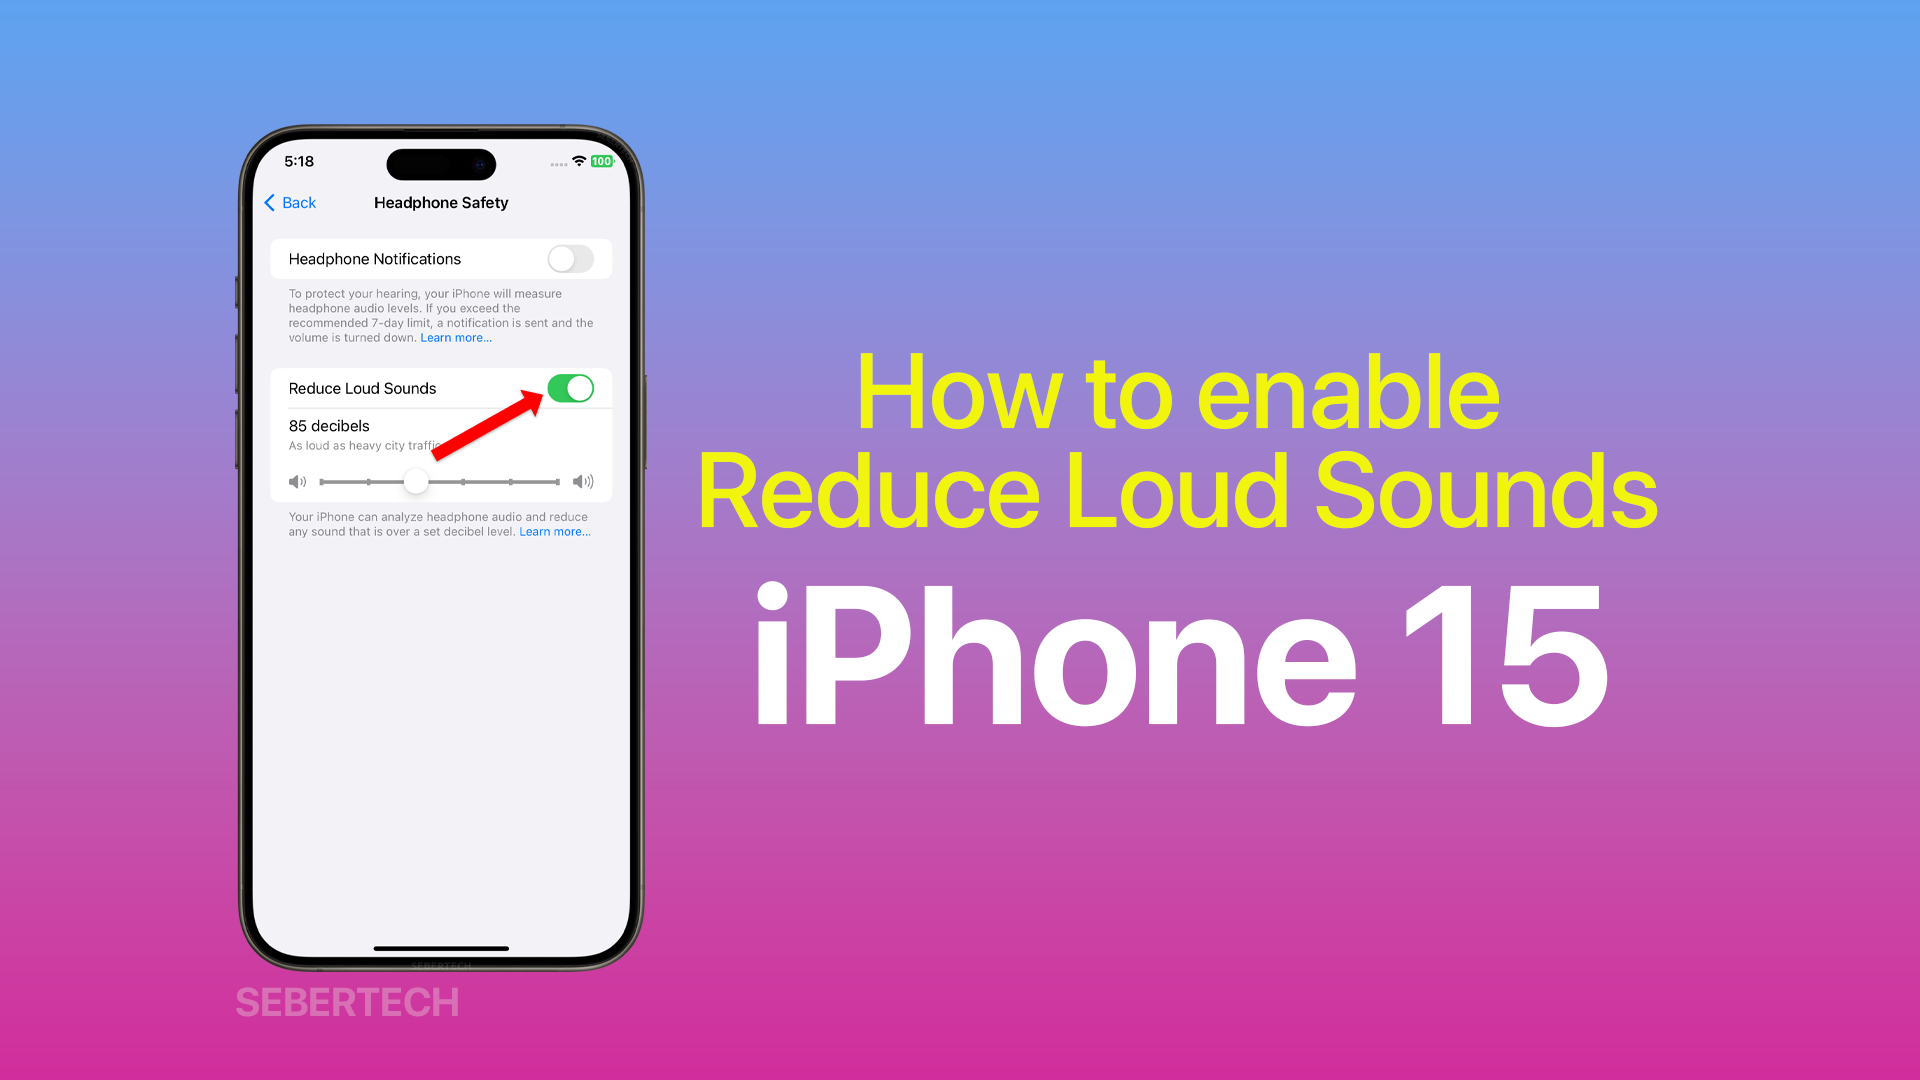 Reduce Loud Sounds on iPhone 15 3